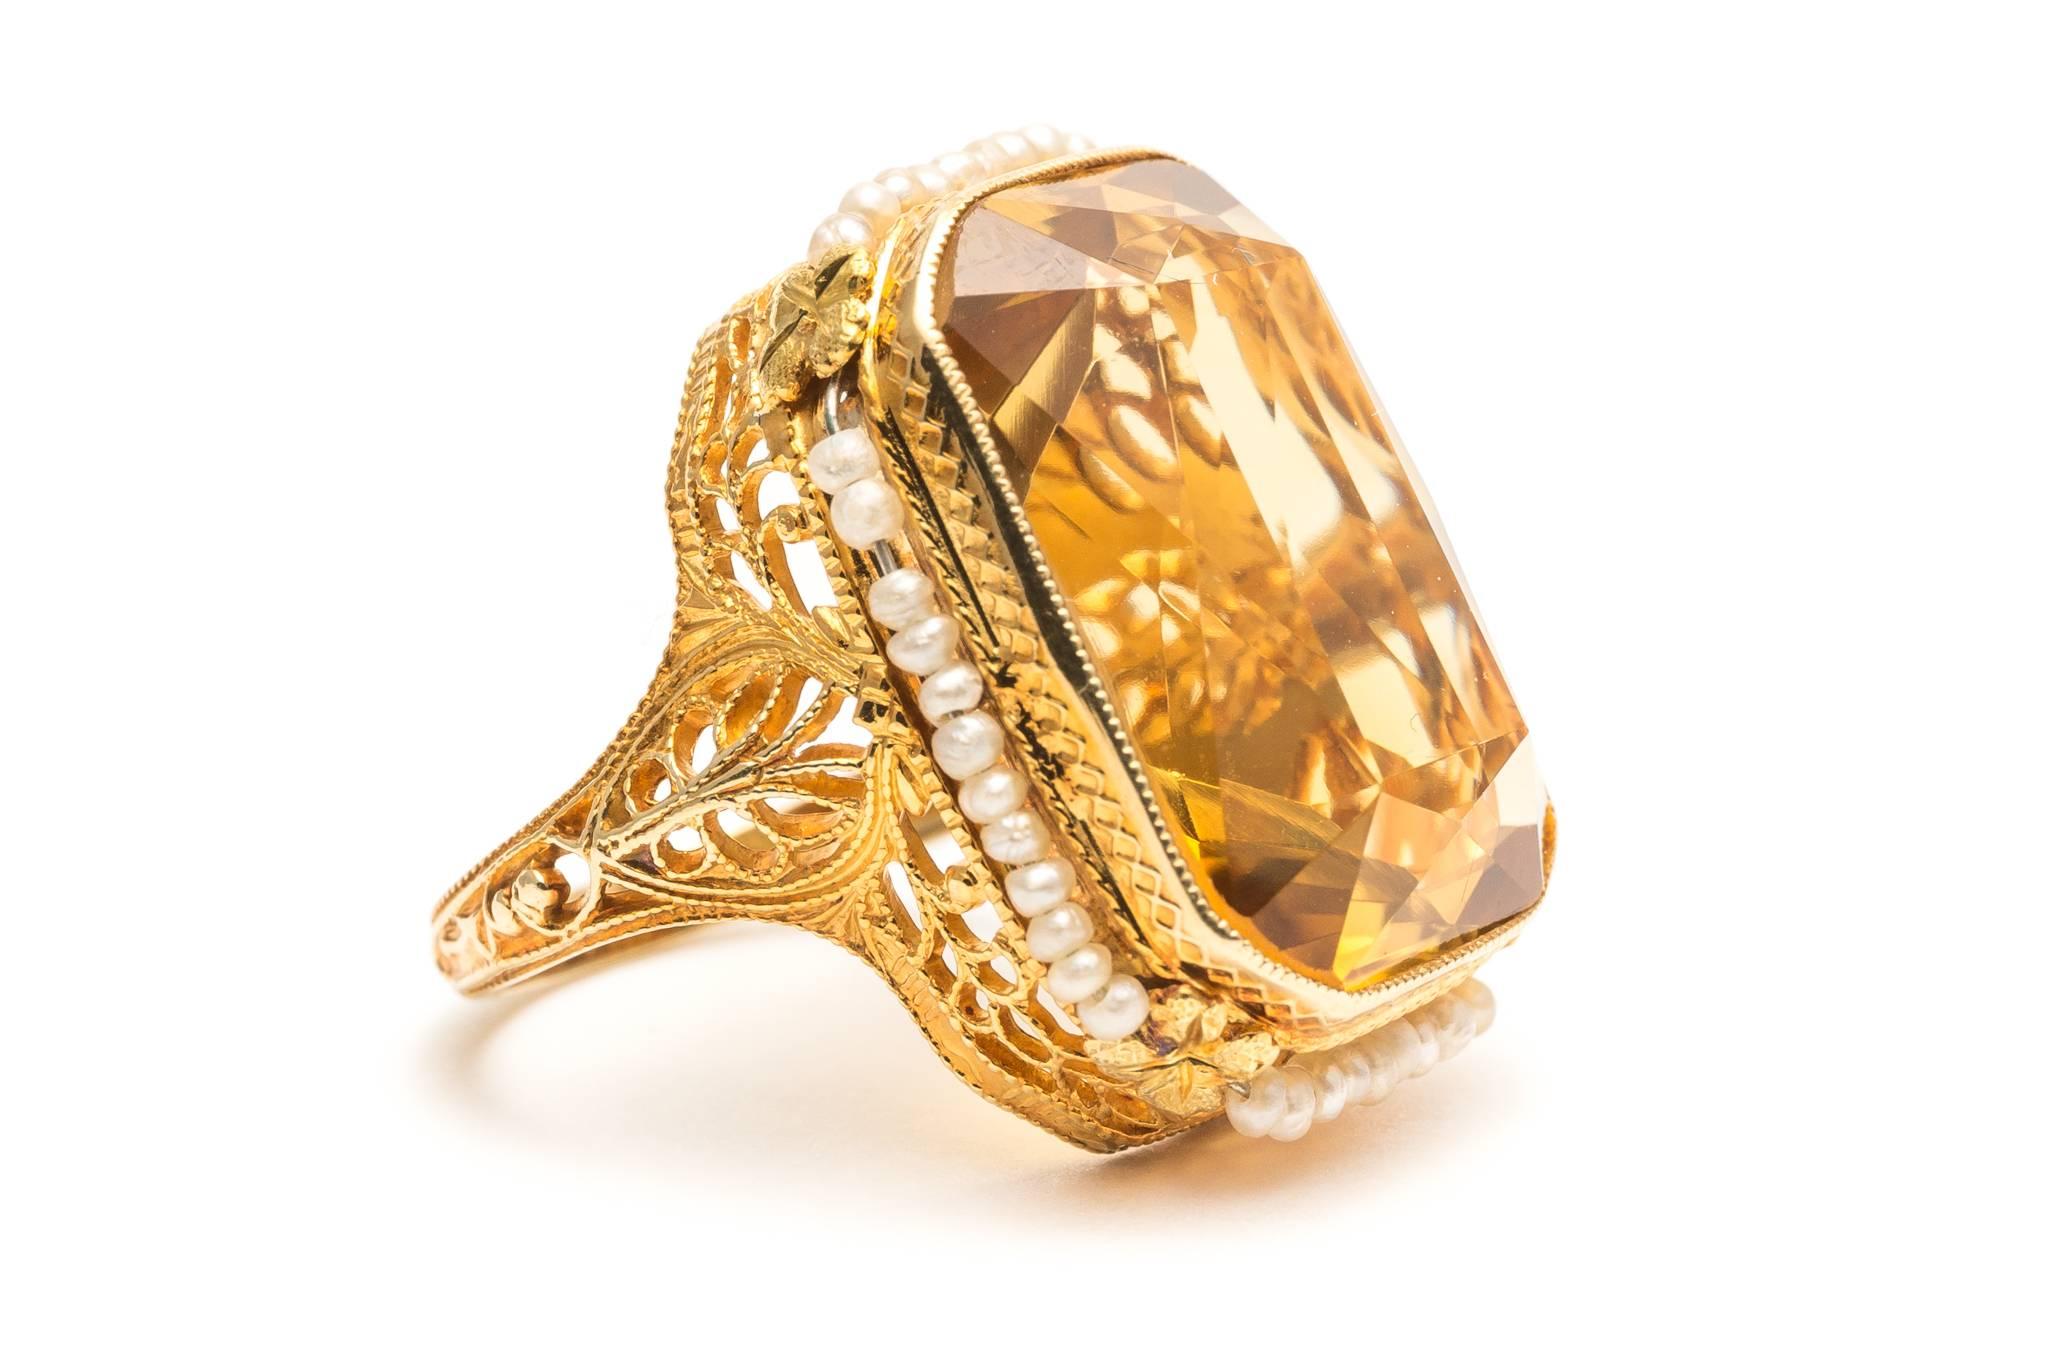 Beacon Hill Jewelers Presents:

A beautiful original art deco period citrine, and pearl ring in 14 karat yellow gold.  Set with an approximately 16 carat rectangular cut citrine, this ring boasts a halo of movable pearl surrounding the citrine along